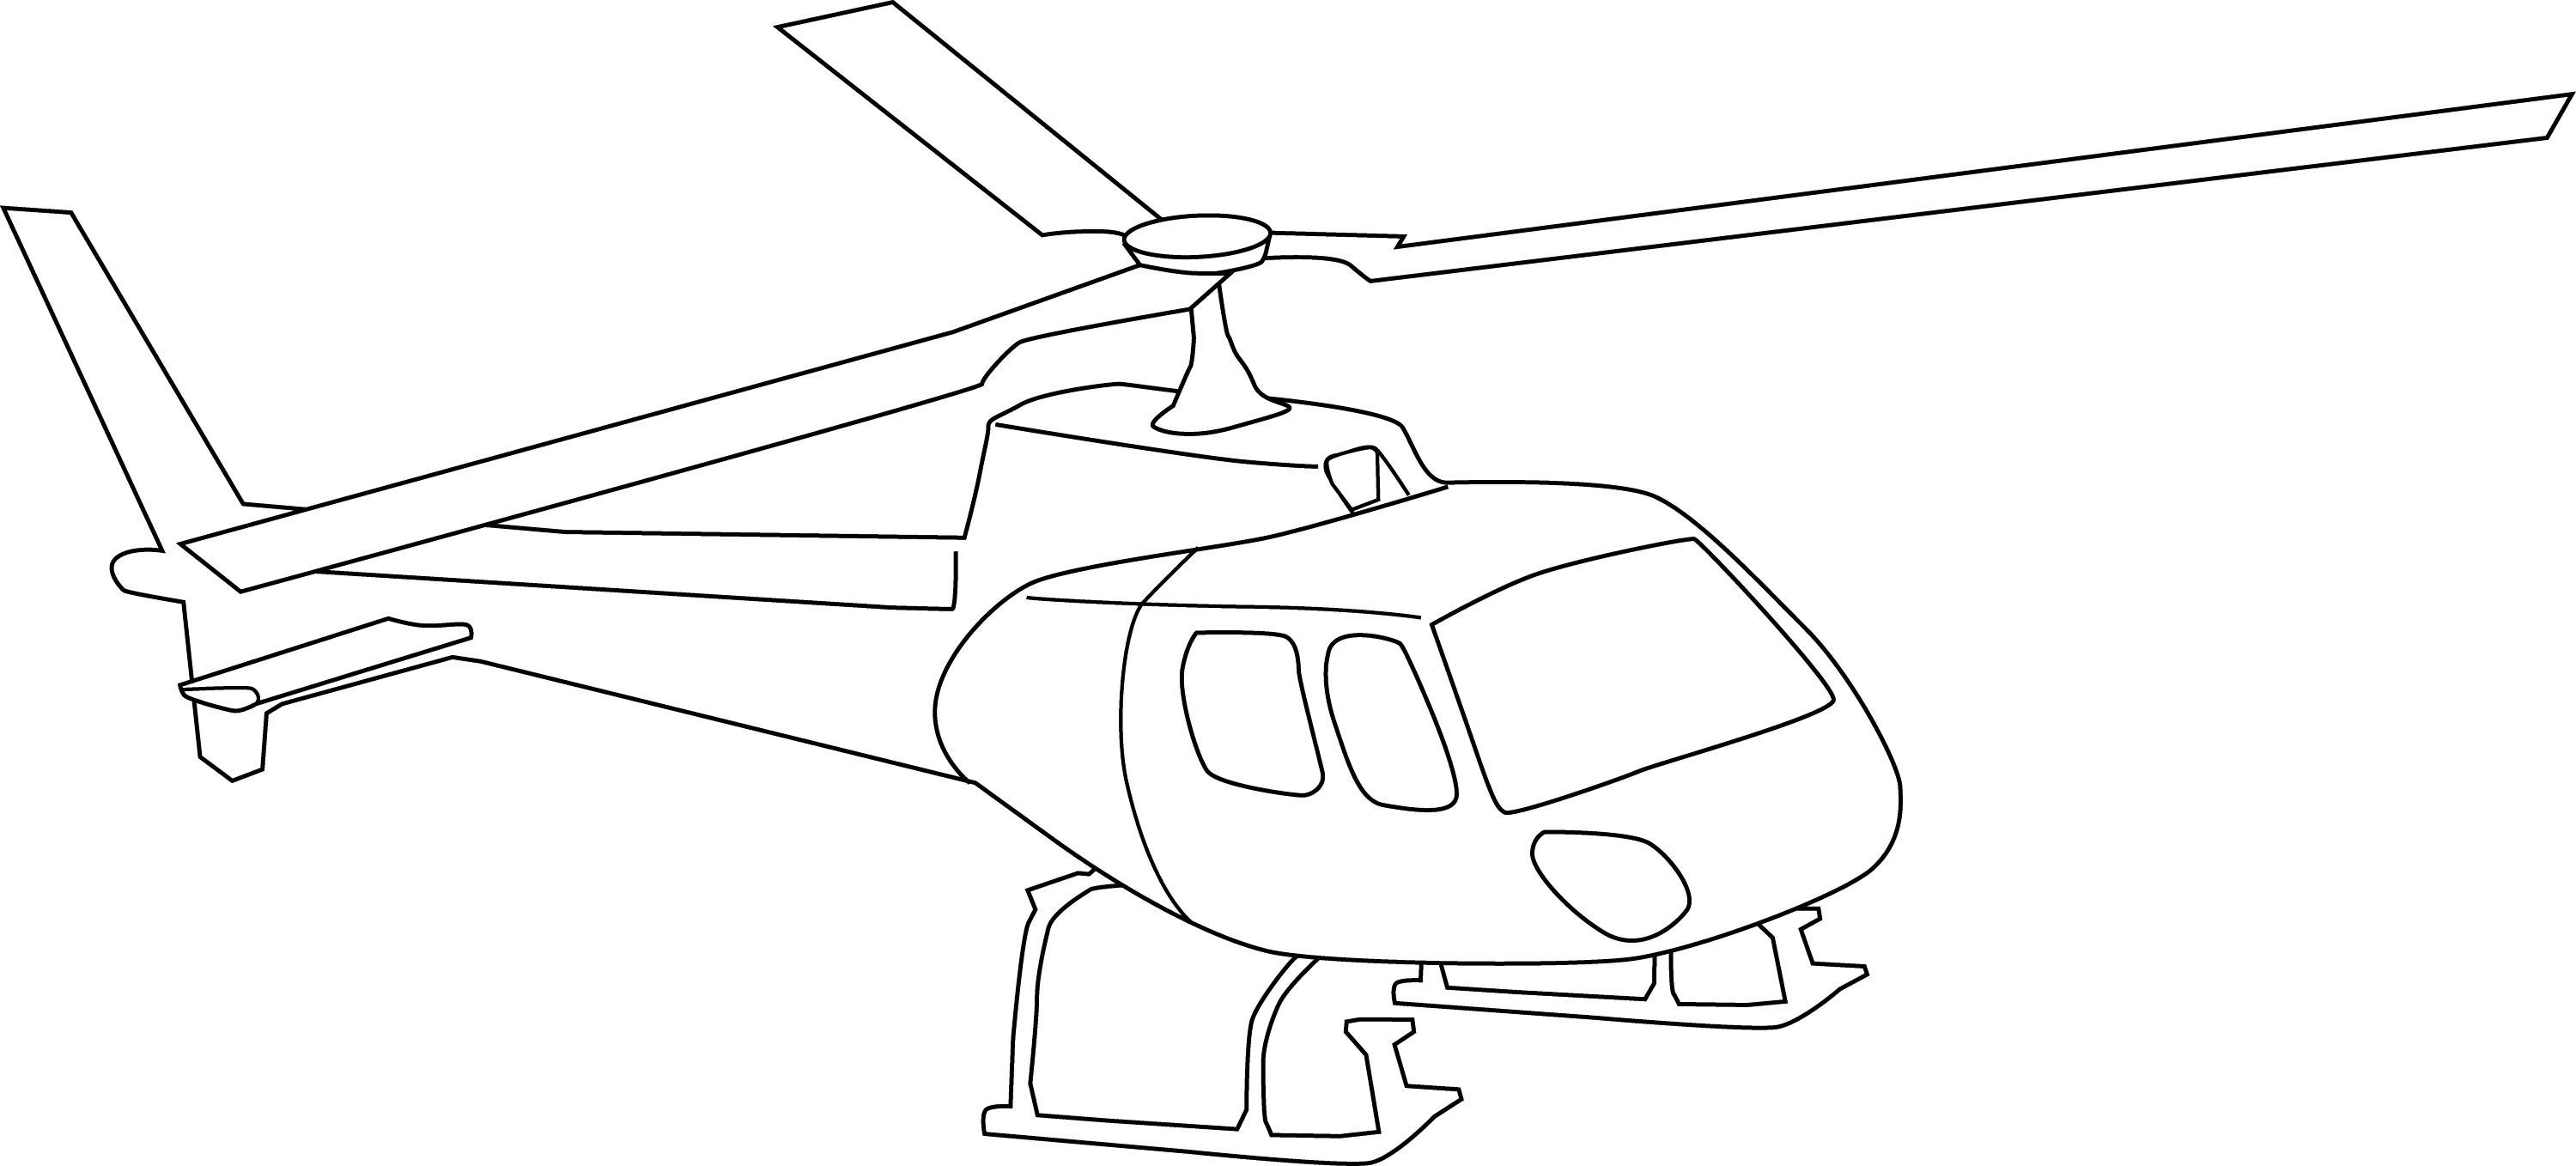  Helicopter Sketch Drawing for Girl